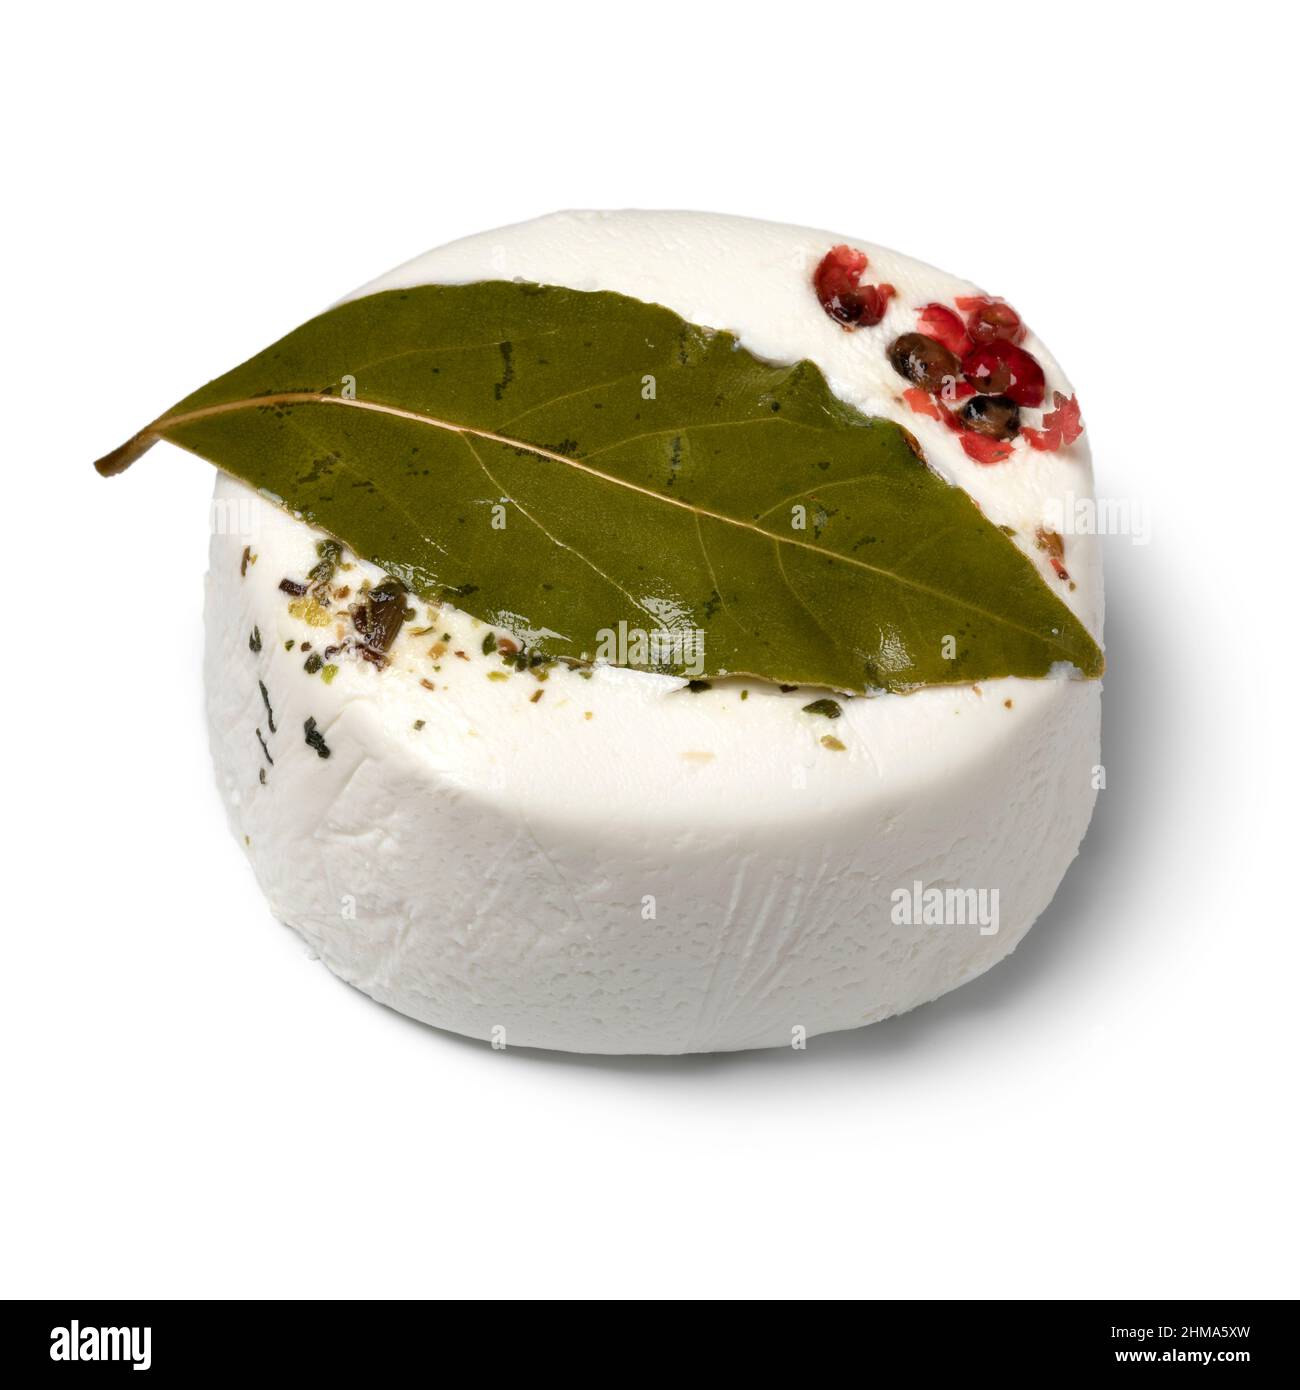 Single French goat cheese with herbs, bay laurel, red peppercorns and olive oil, Tomette provencal a l'huile, isolated on white background Stock Photo